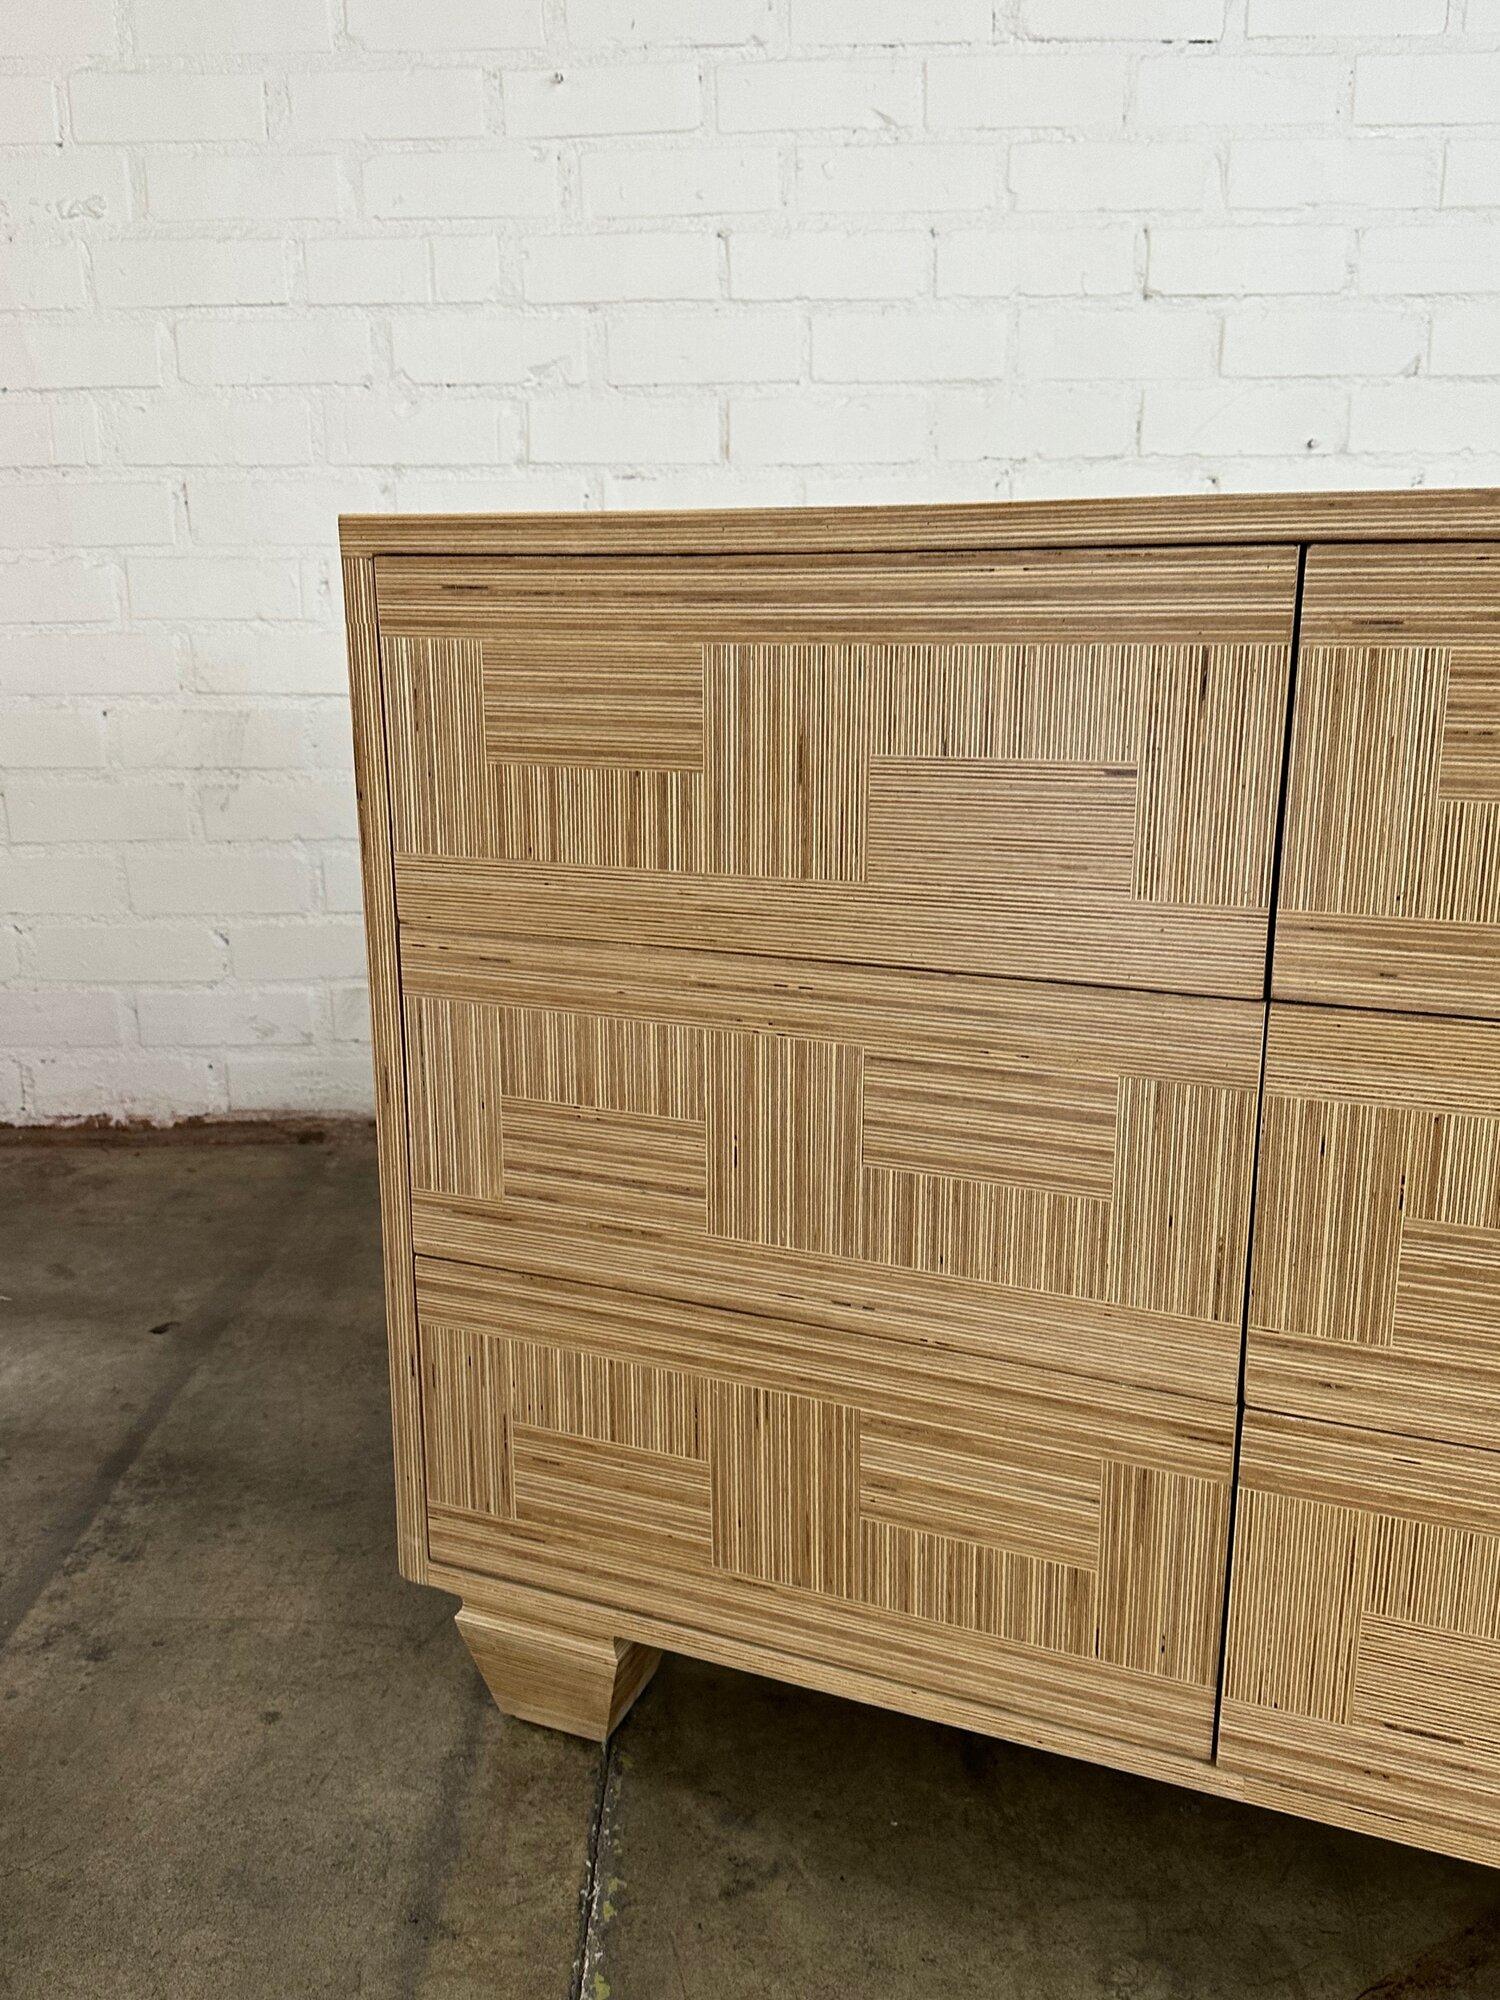 W64.5 D20 H33.25

Handmade in house for a custom staging project this one a kind dresser features patchwork Baltic birch trim. Push drawers to avoid hardware and deep ample drawers. Dresser shows in excellent condition fabricated and used for